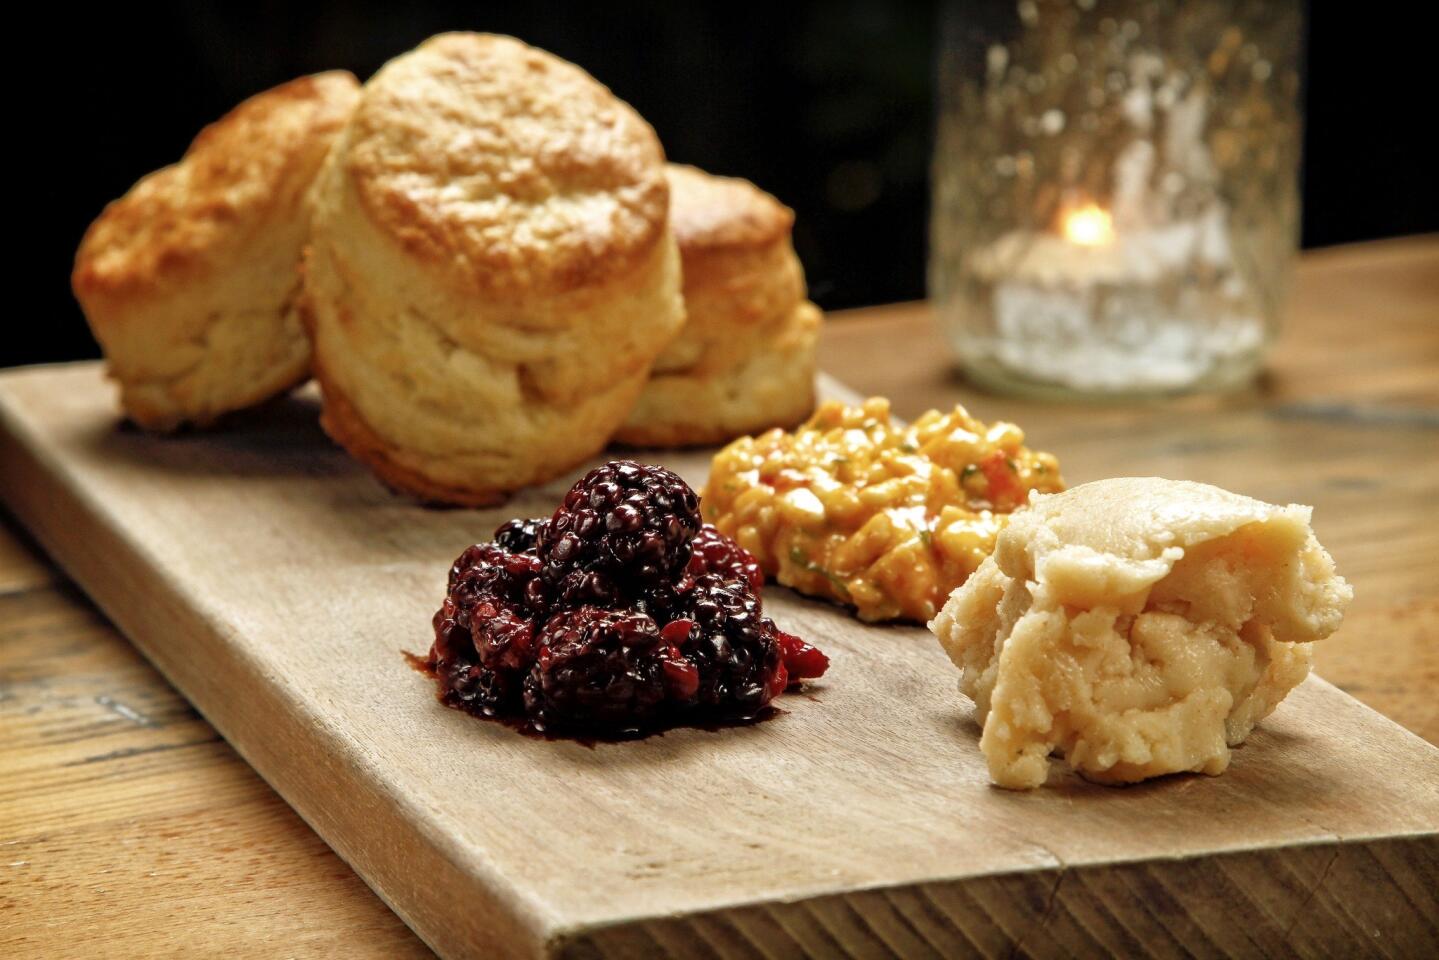 Butter biscuits served with mashed blackberries, pimento cheese spread and honey butter.